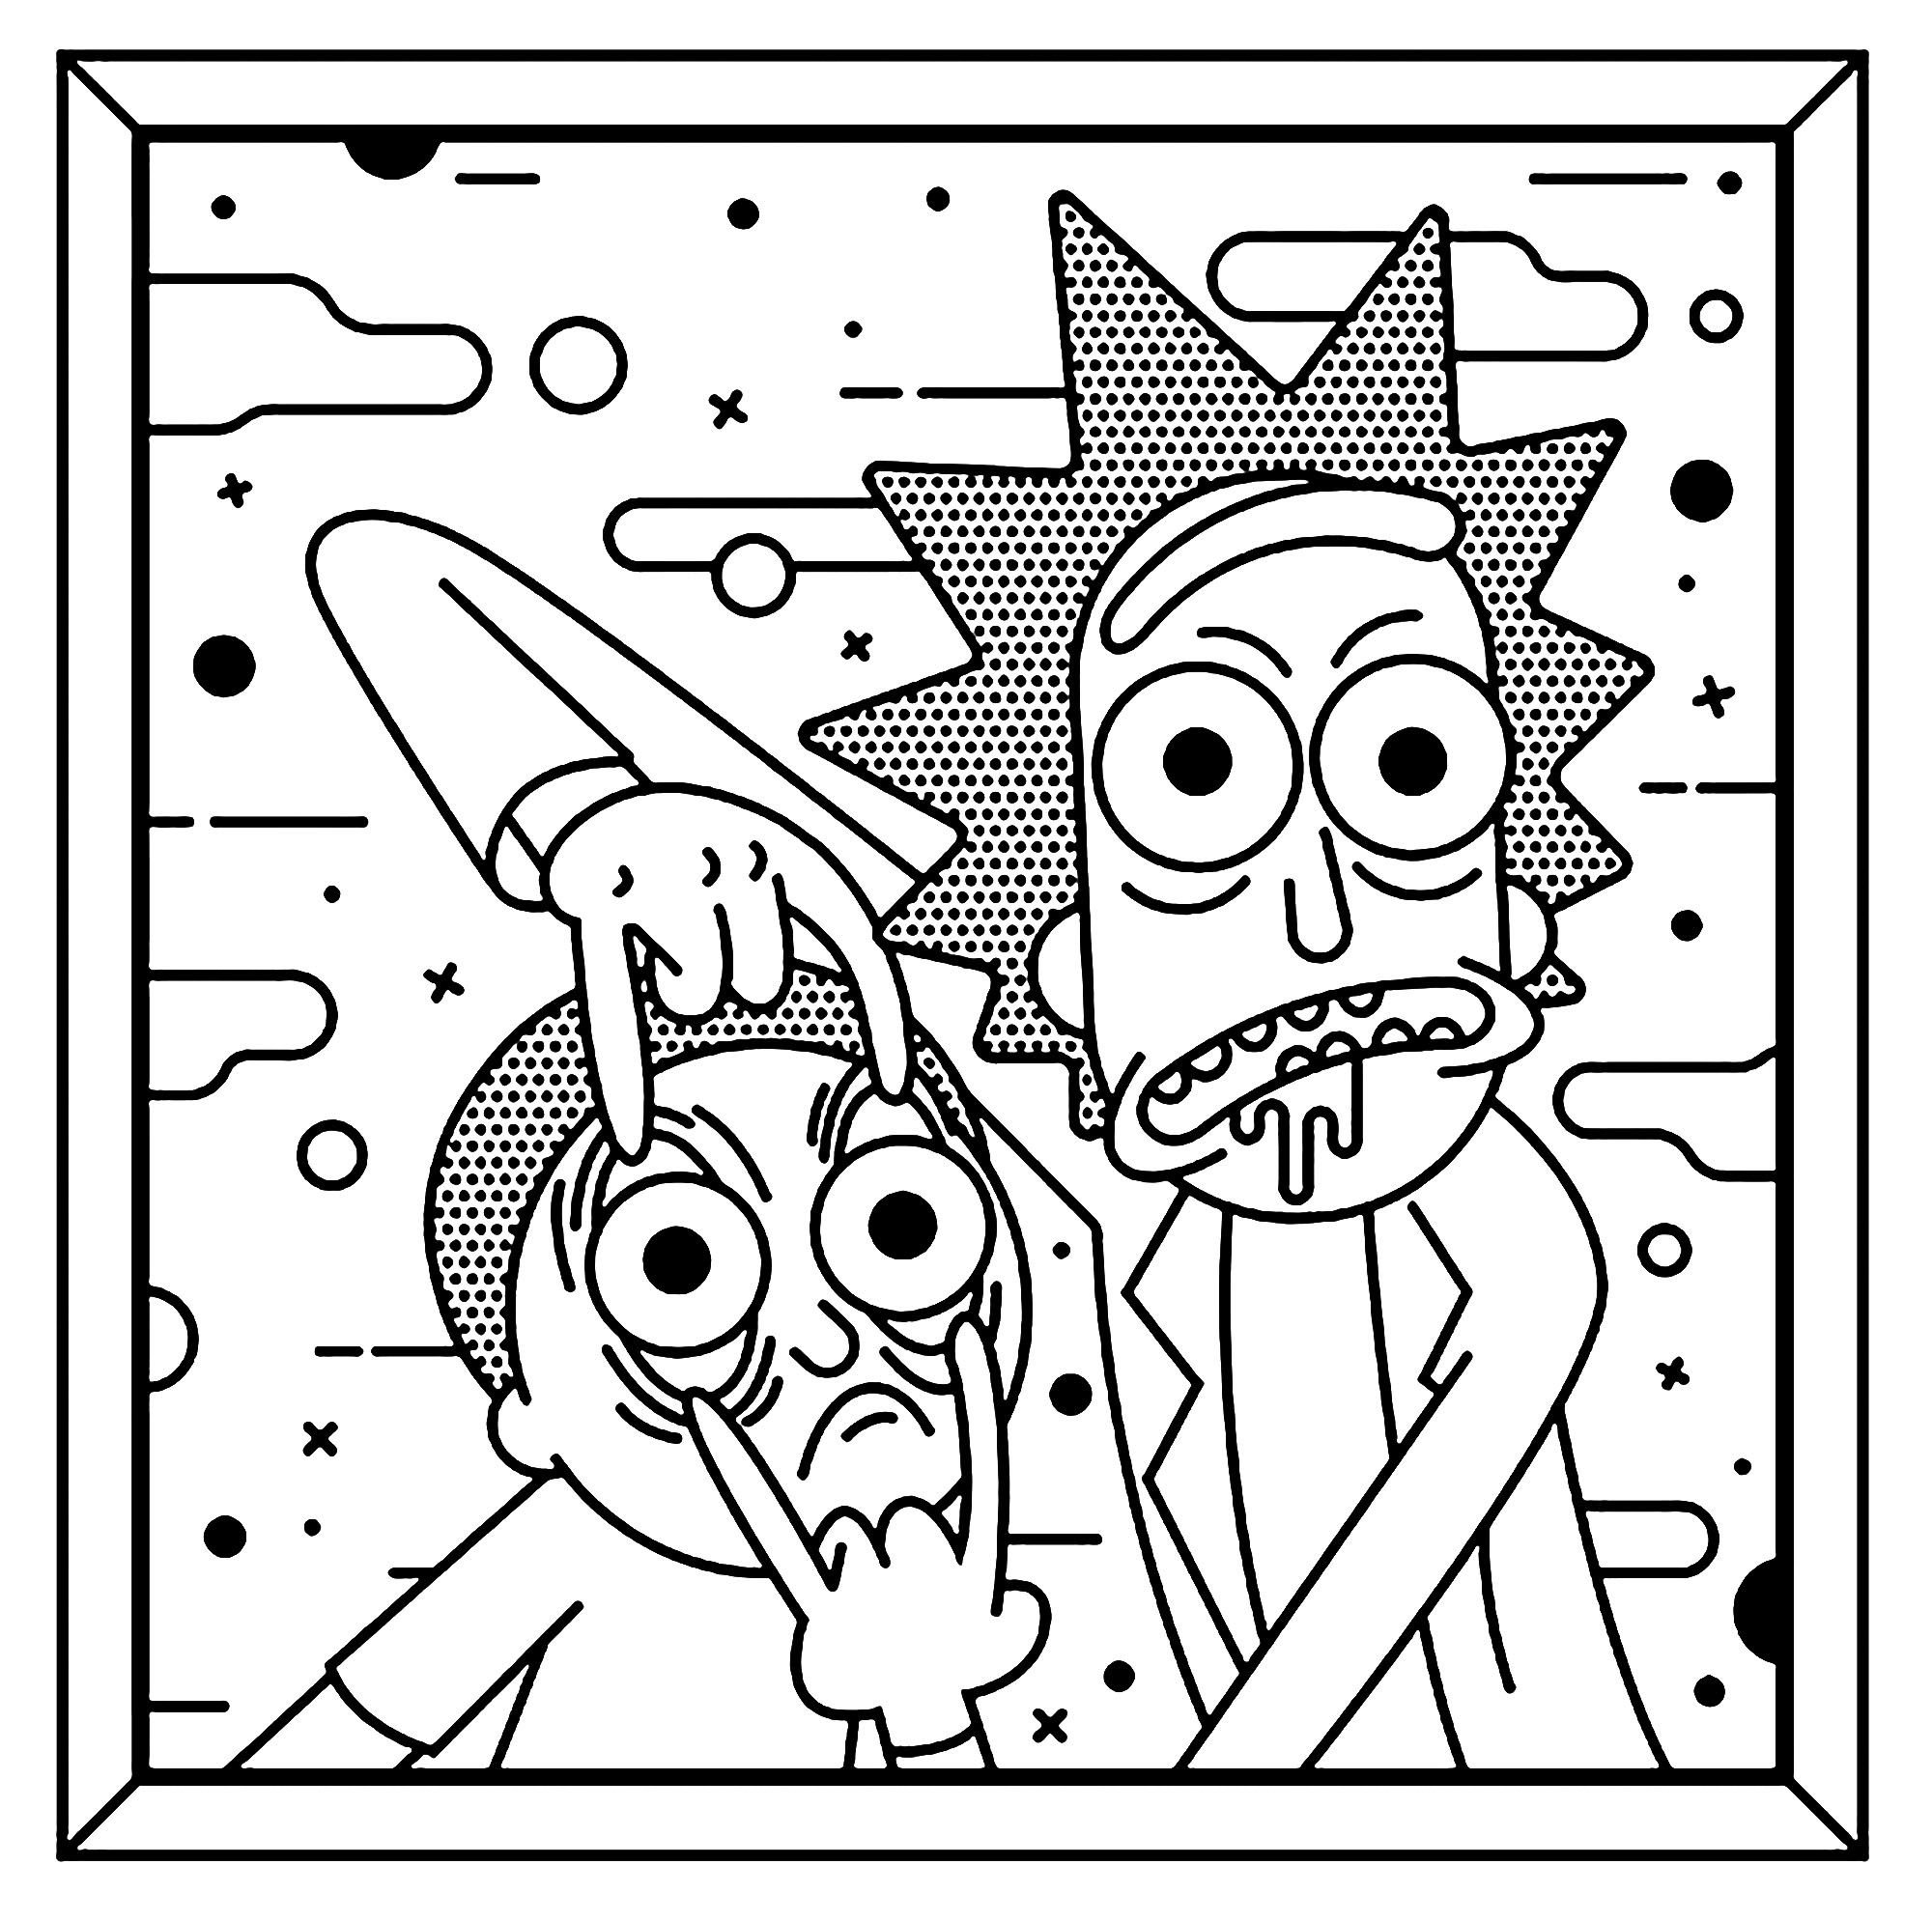 Rick and Morty раскраска